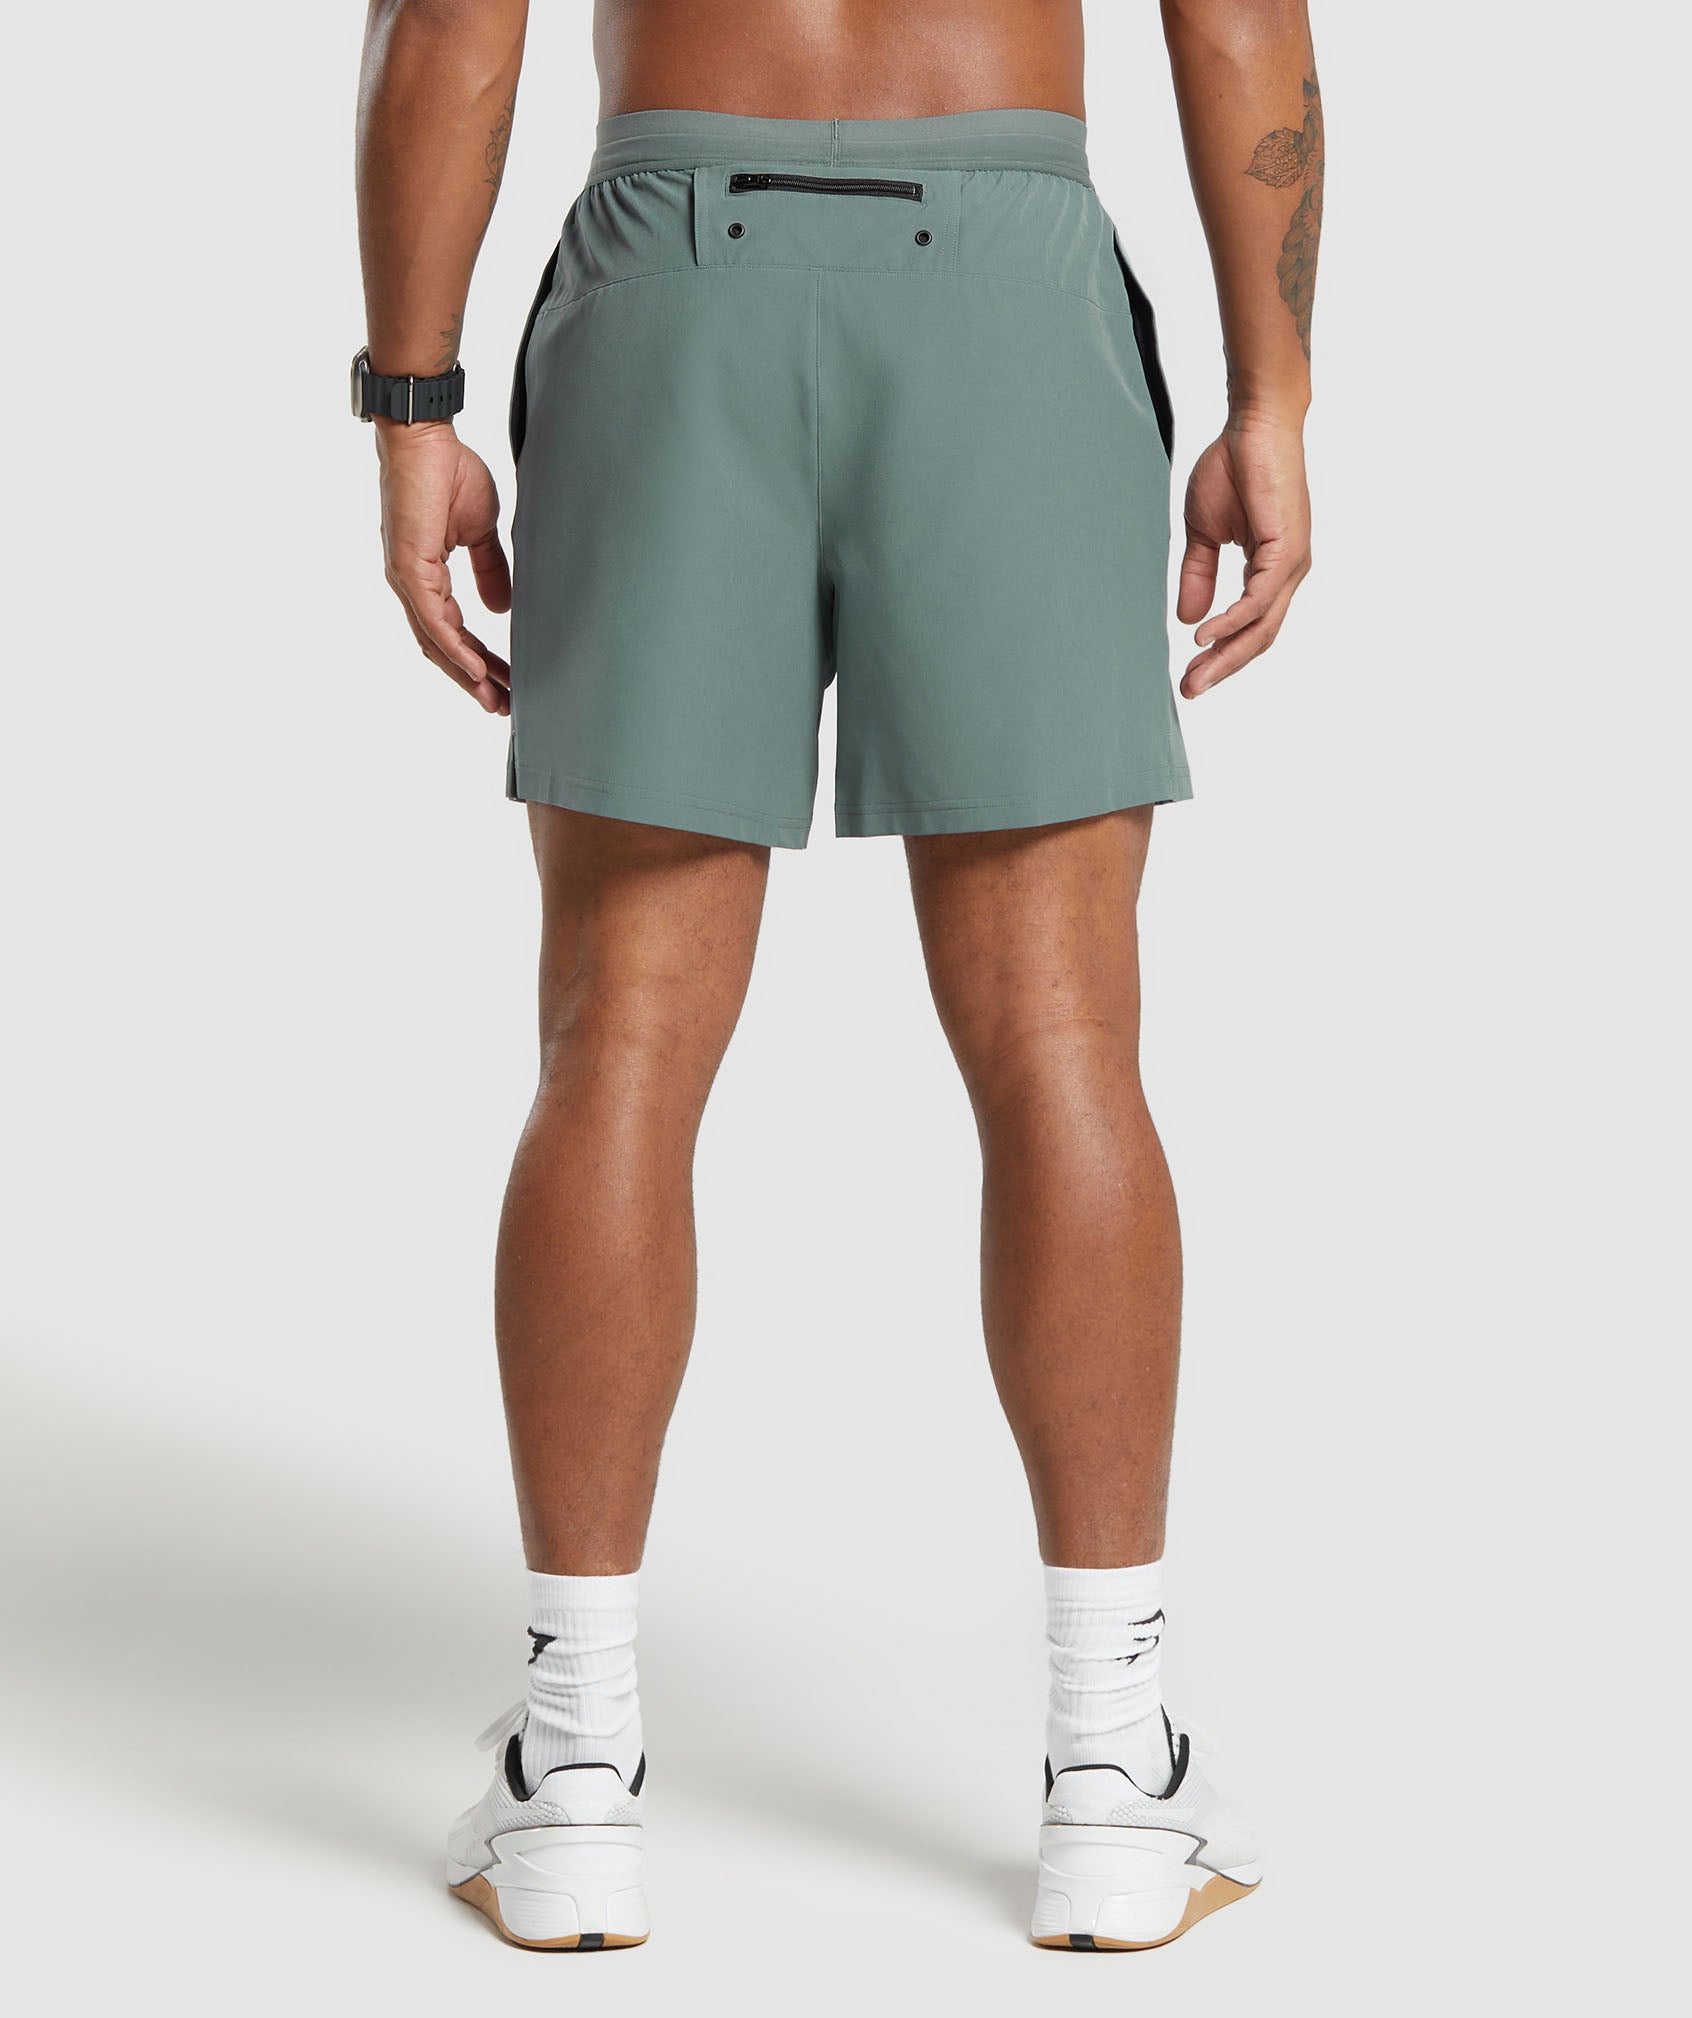 Land to Water 6" Shorts in Cargo Teal - view 2